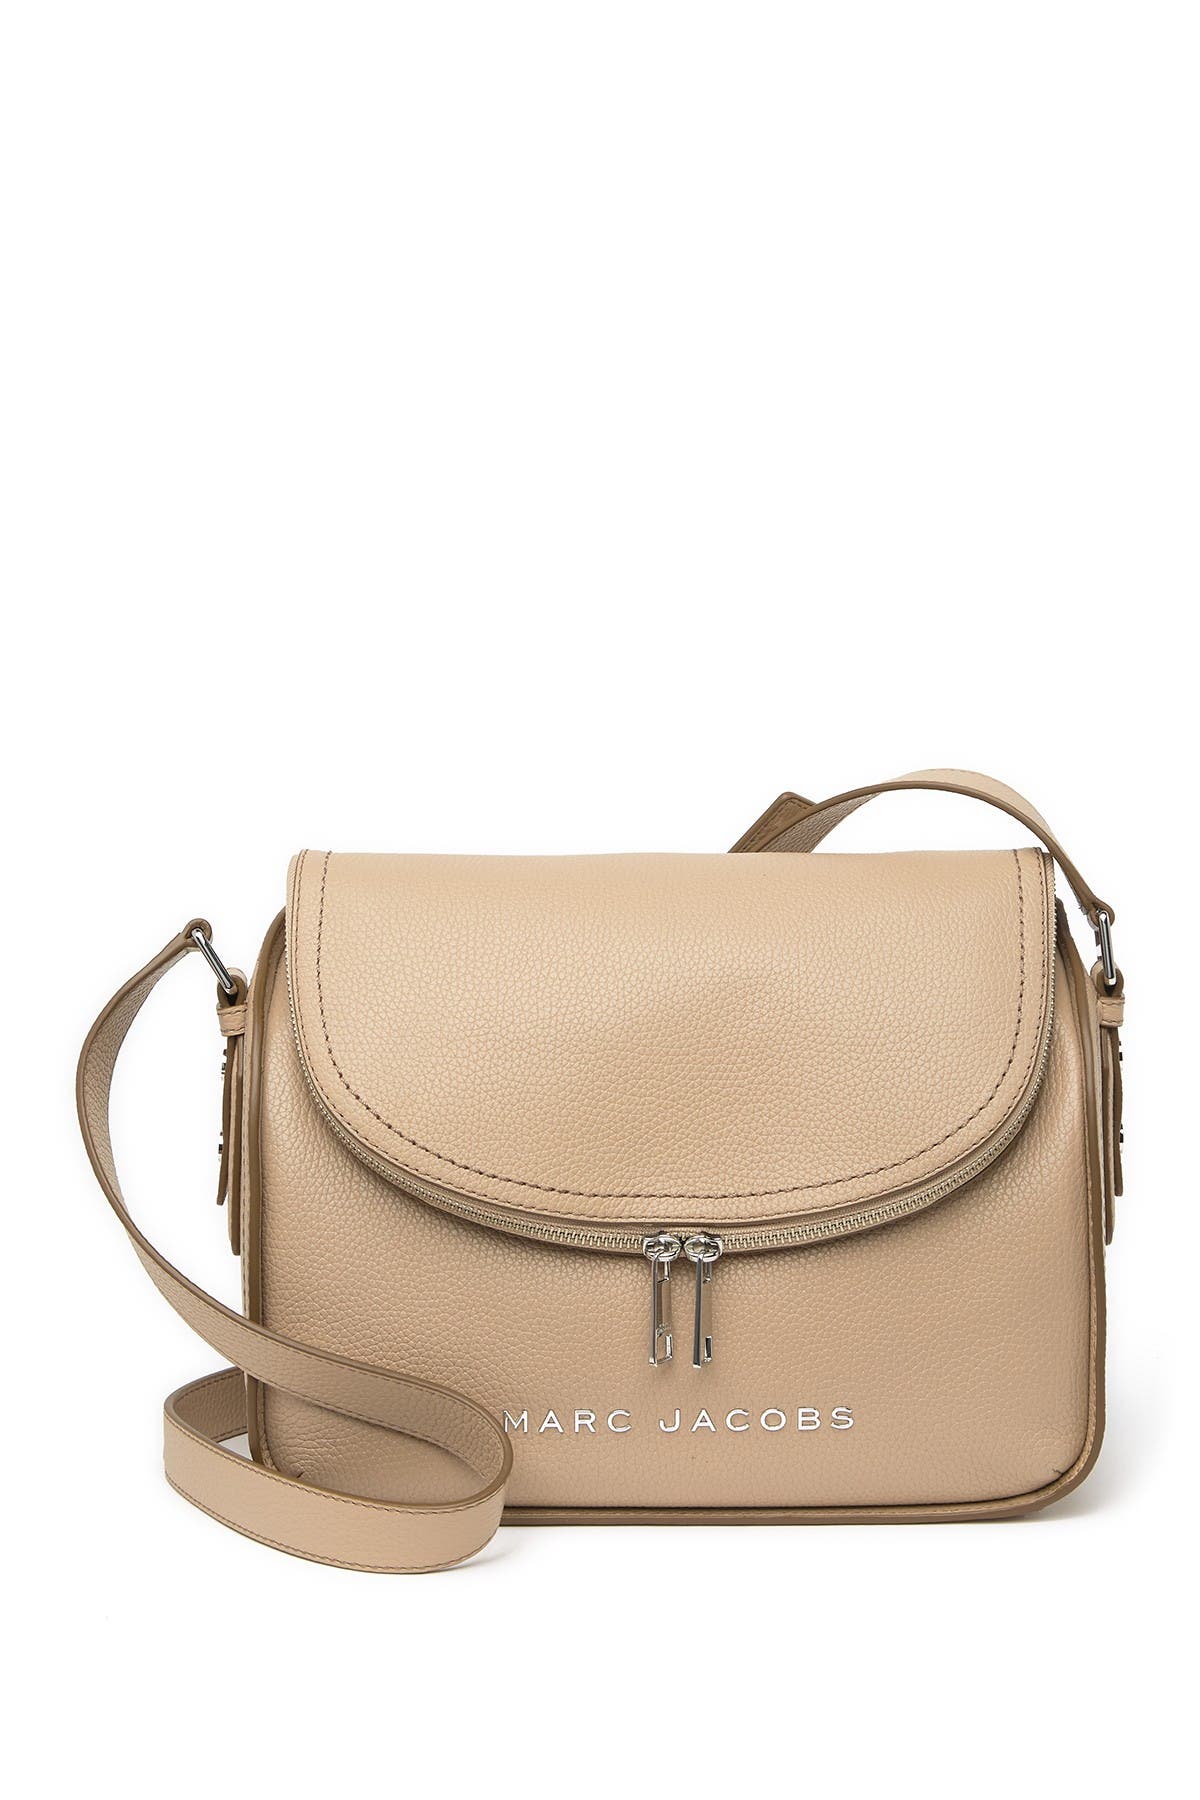 Marc Jacobs The Groove Leather Messenger Bag In Dark Beige3